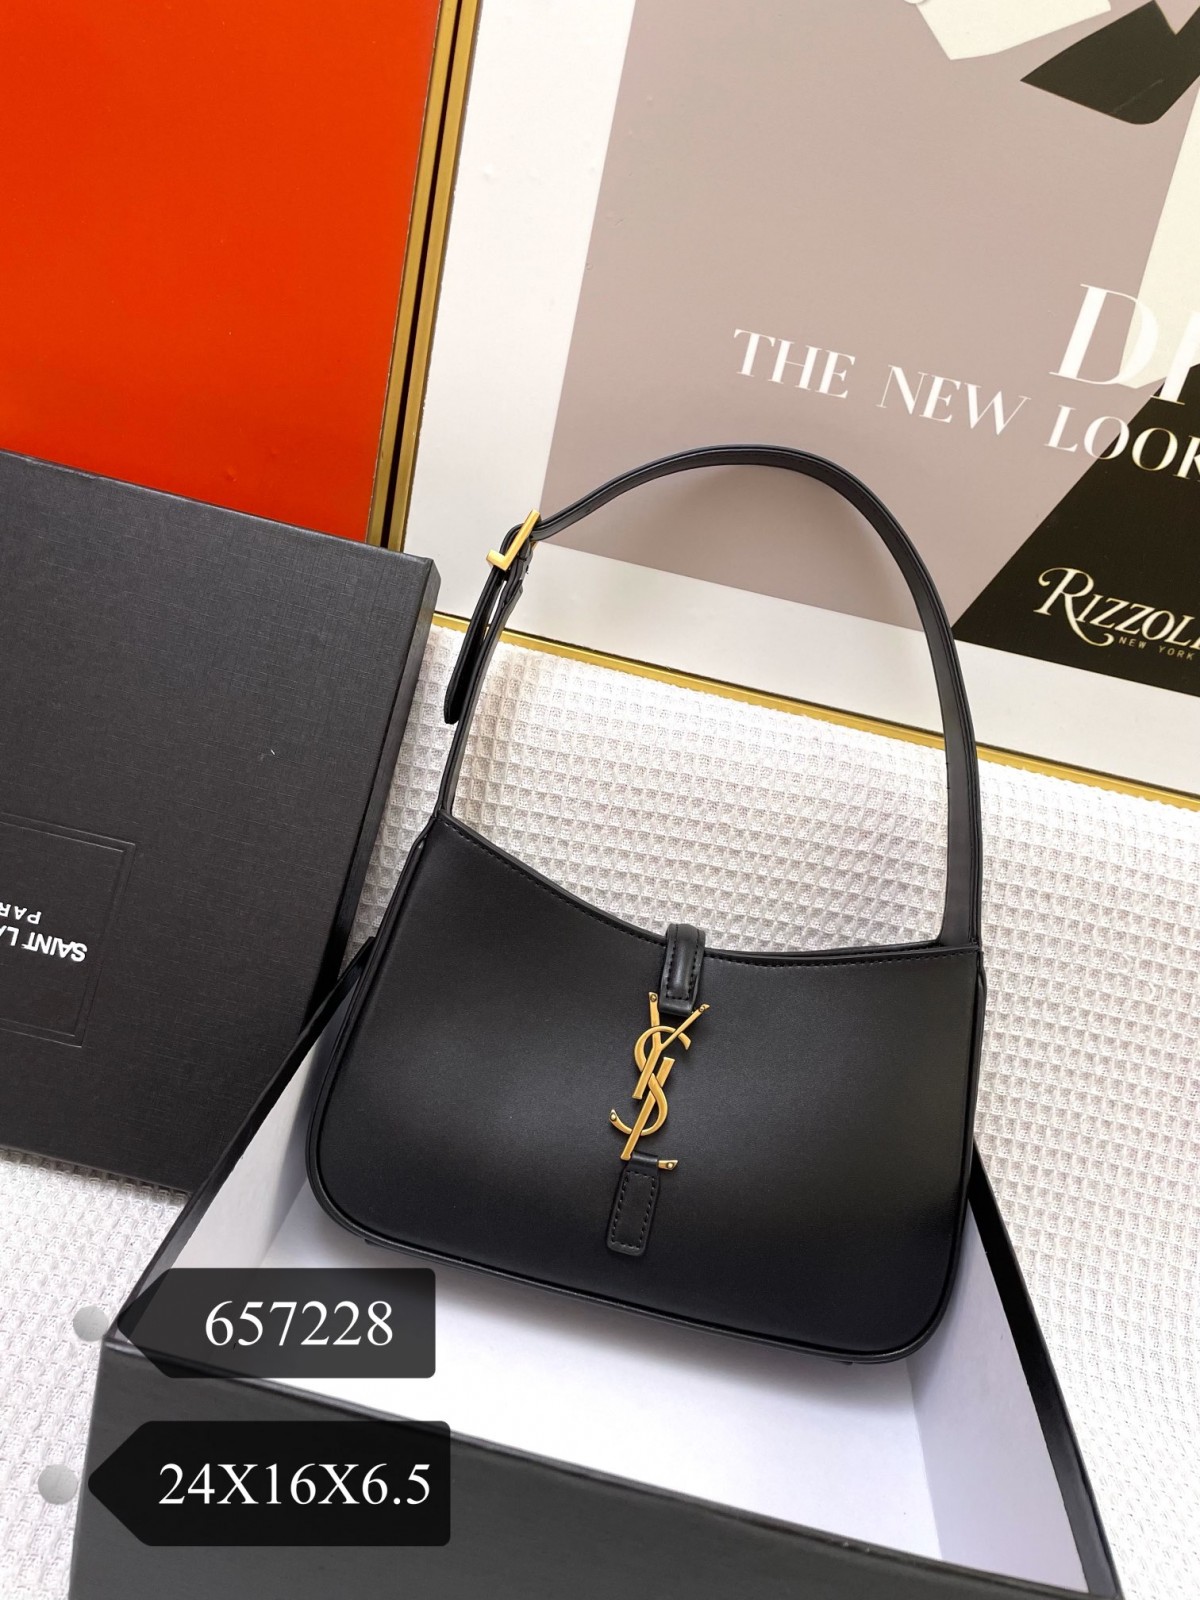 The most popular Saint Laurent LE 5 À 7 replica bags price is only $199 (2022 Special)-Best Quality Fake Louis Vuitton Bag Online Store, Replica designer bag ru